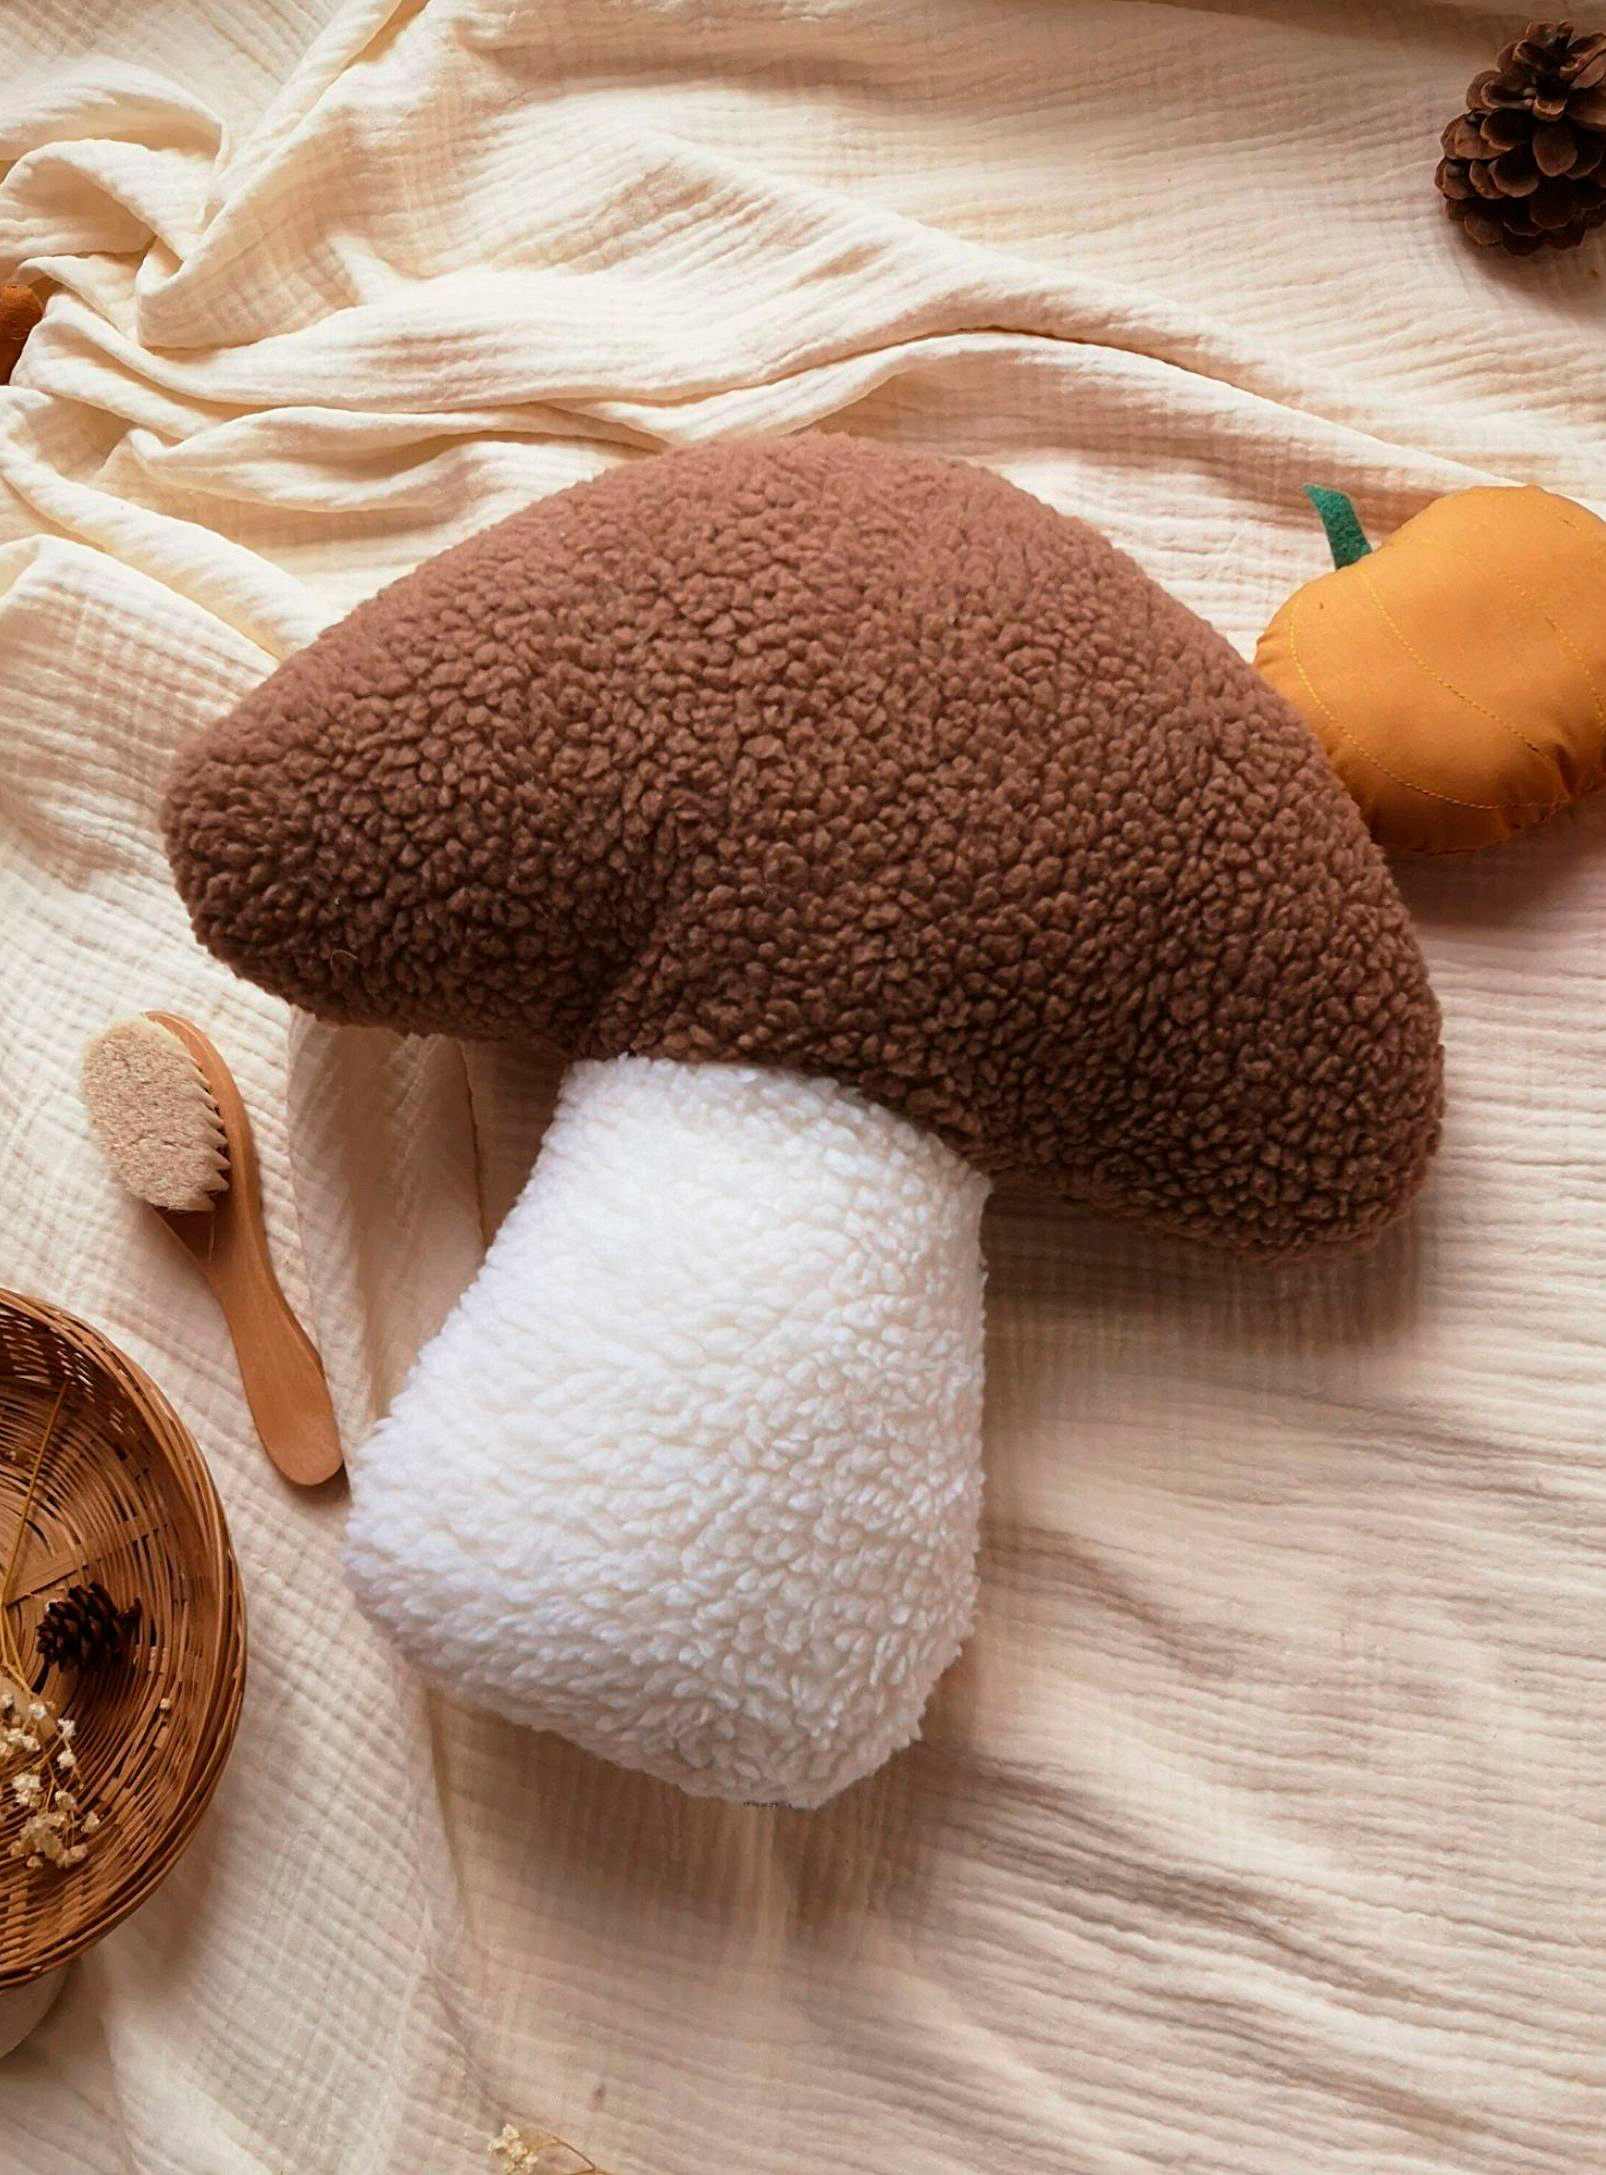 The Butter Flying - Le petit coussin shiitake effet mouton